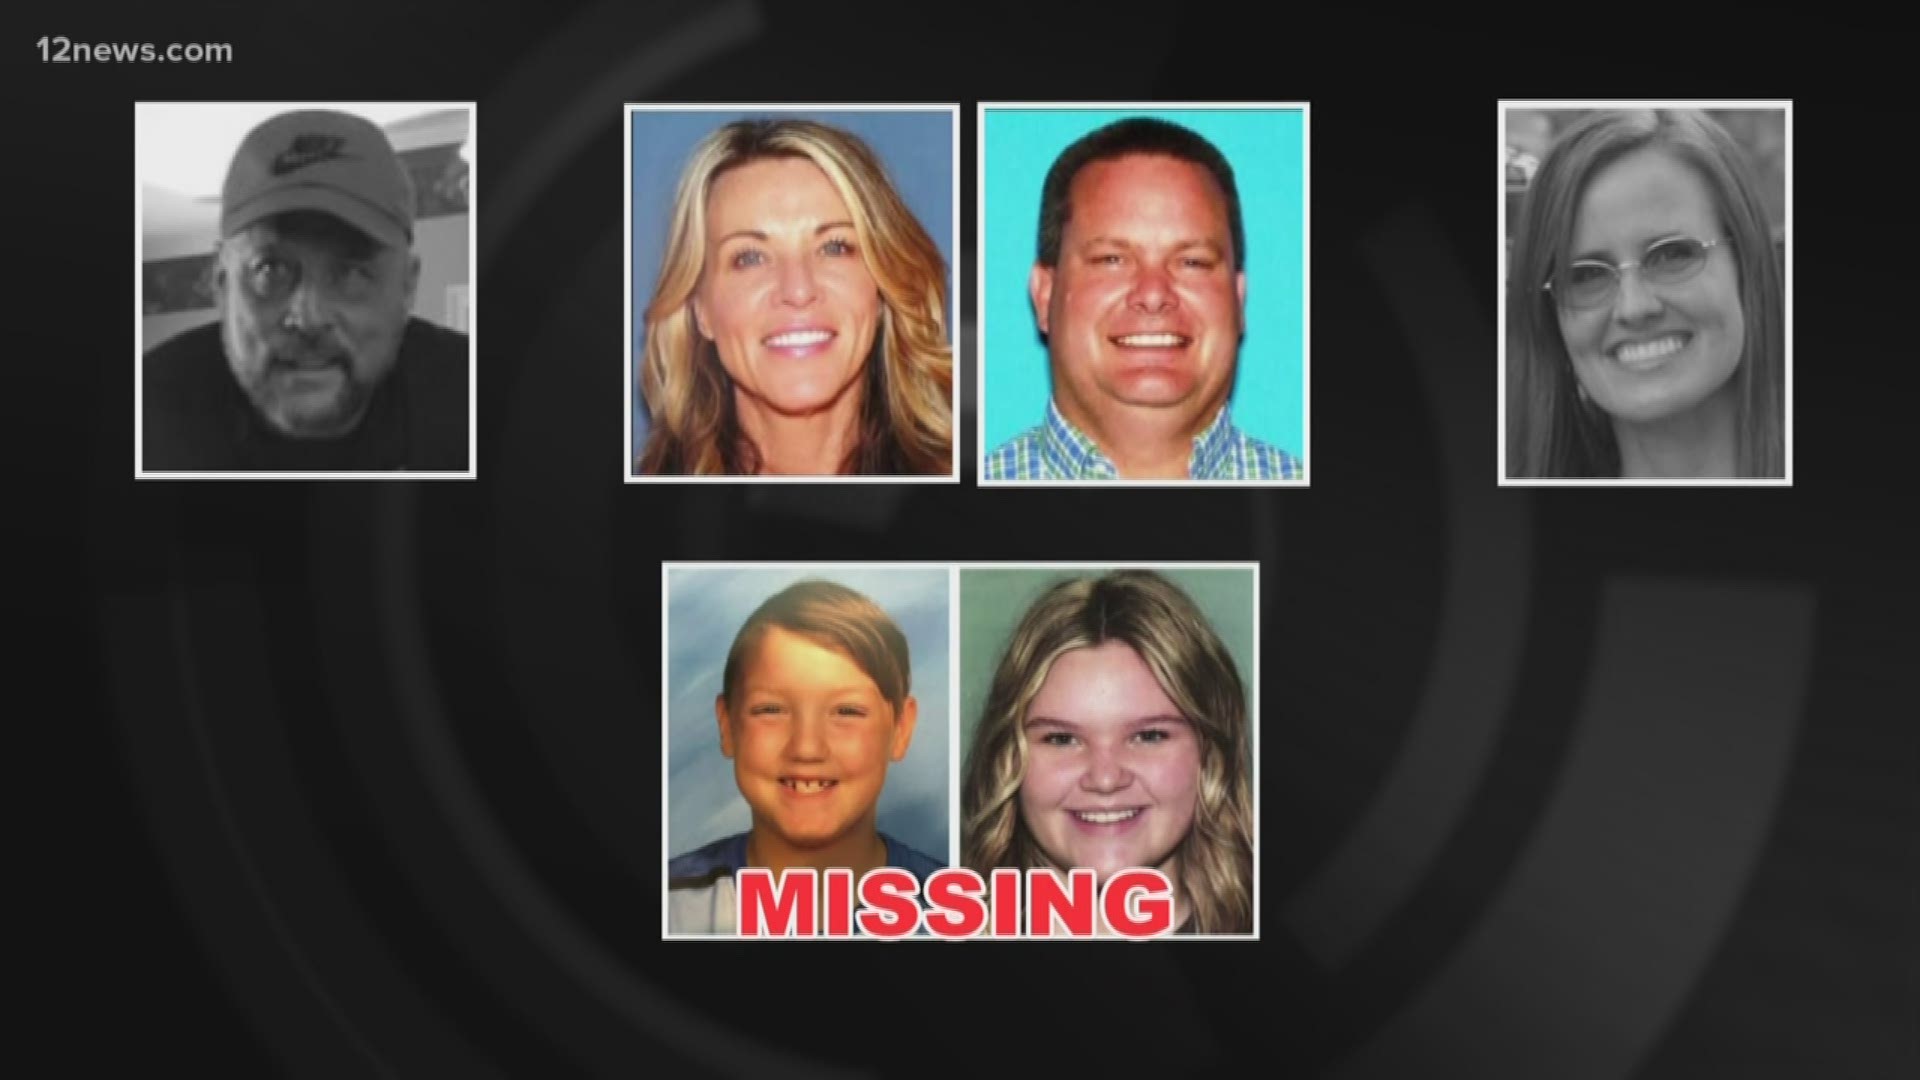 Rexburg police named Lori Vallow and Chad Daybell "persons of interest" in the disappearance of Lori's two children, JJ Vallow and Tylee Ryan.